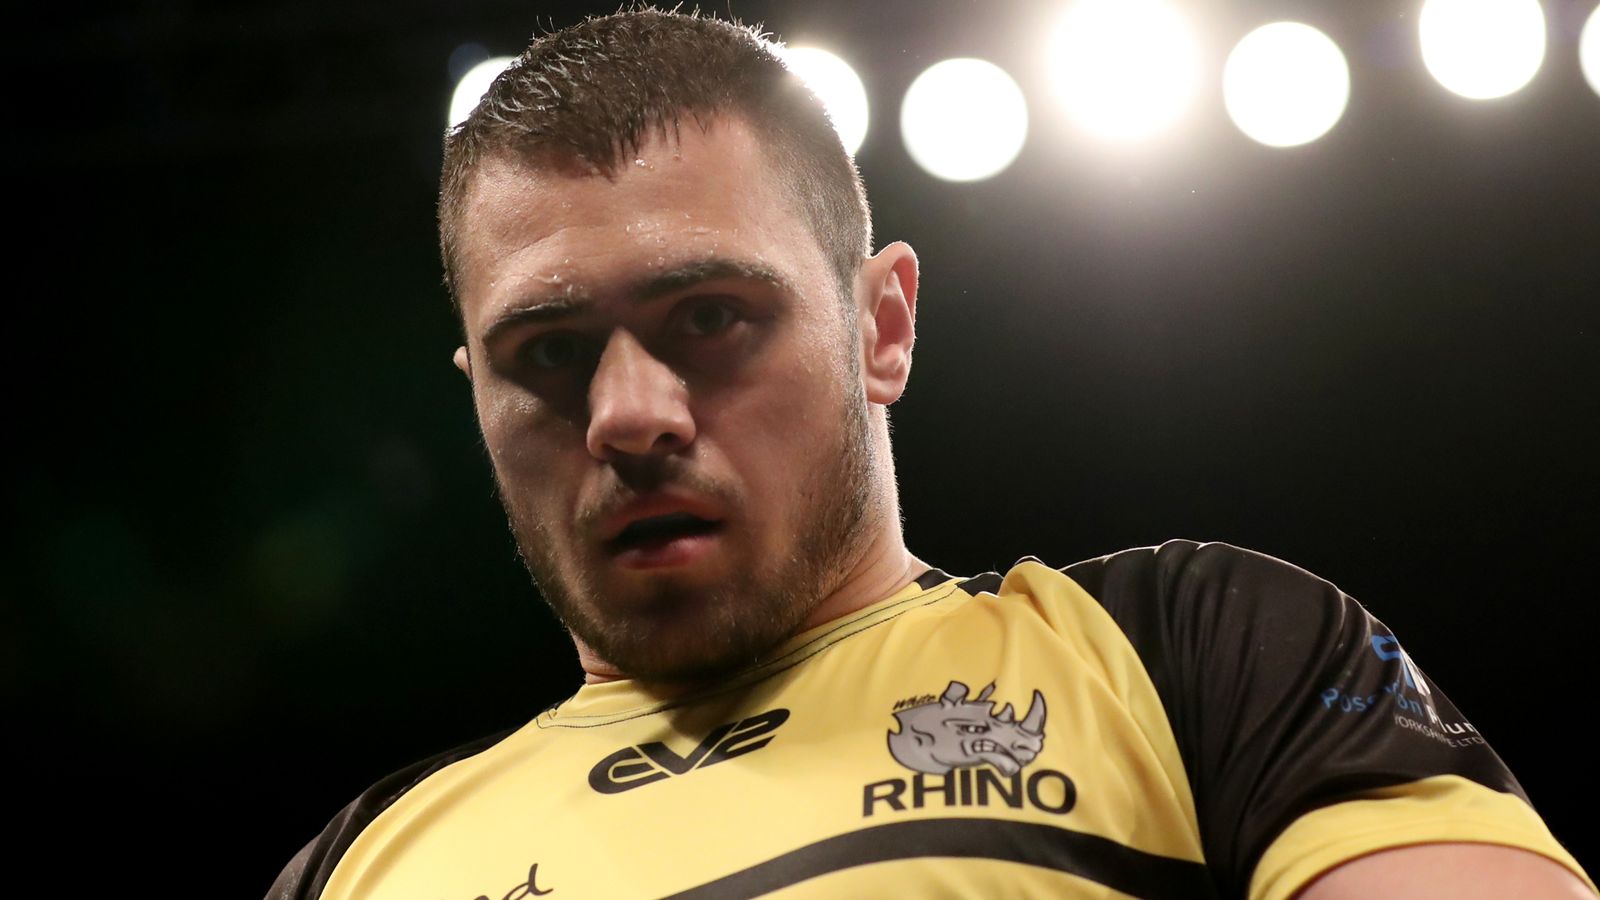 David Allen backs himself as 'big favourite' in heavyweight bout with